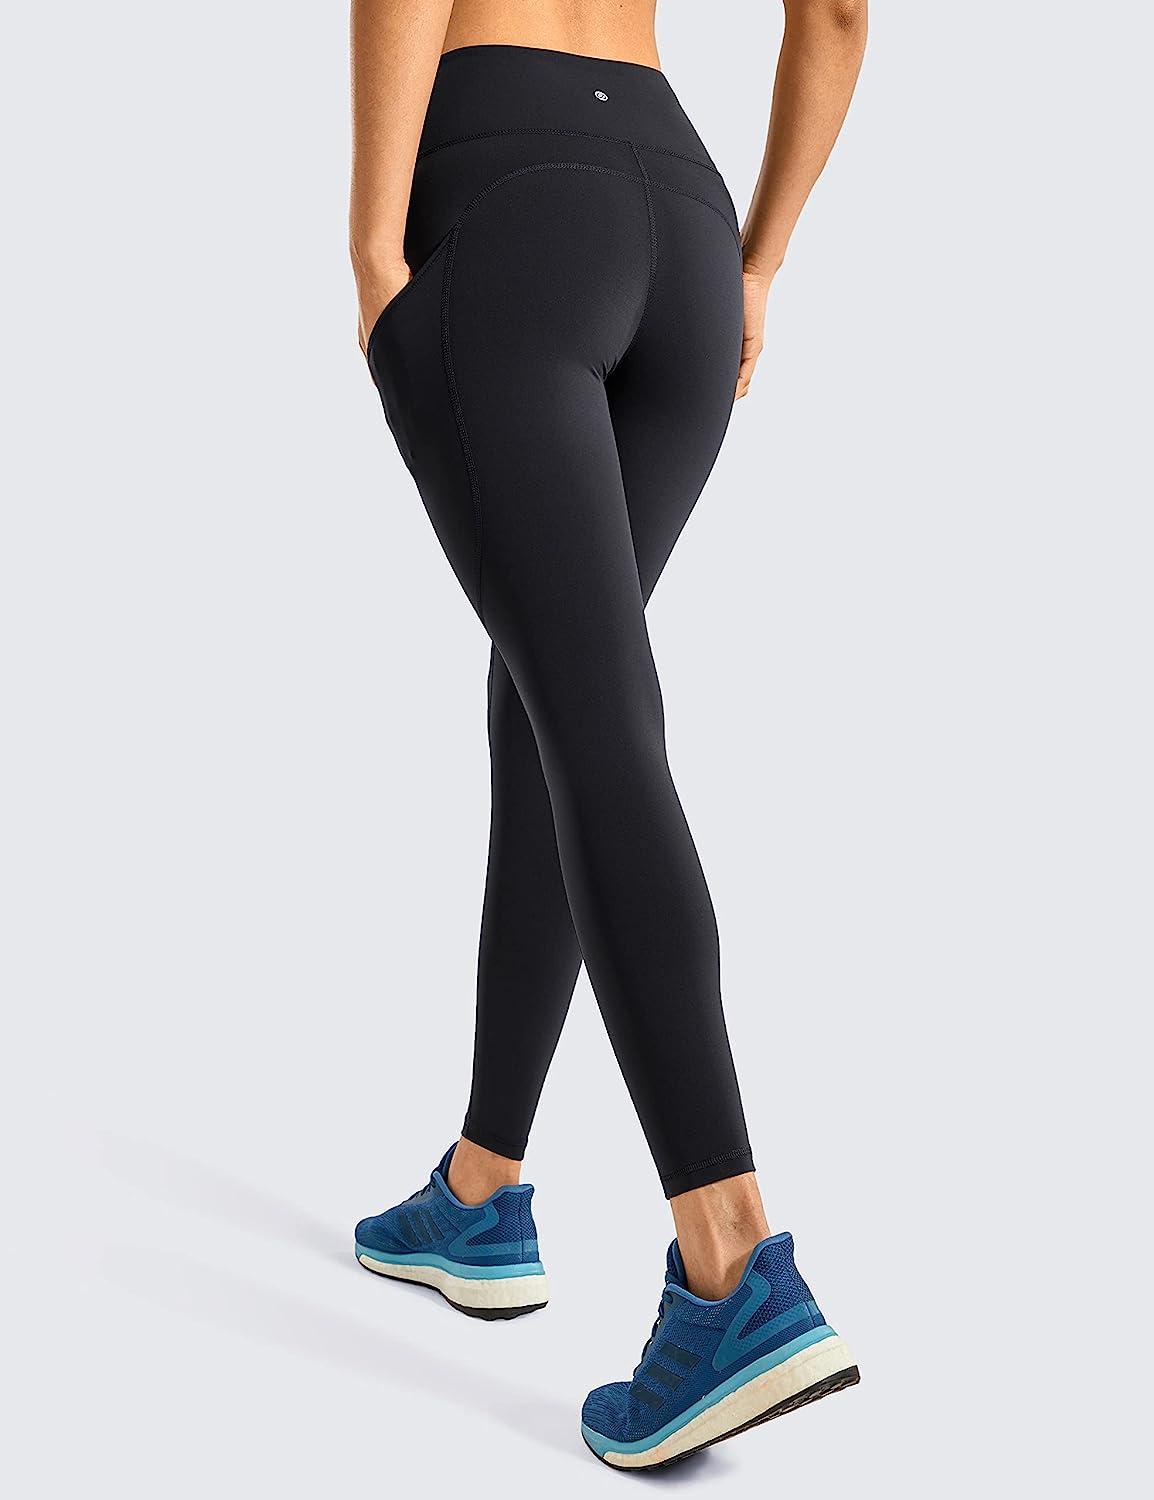 CRZ YOGA Women's Naked Feeling Workout Leggings 25 Inches - High Waisted Yoga  Pants with Side Pockets Athletic Running Tights 25 inches Medium Black